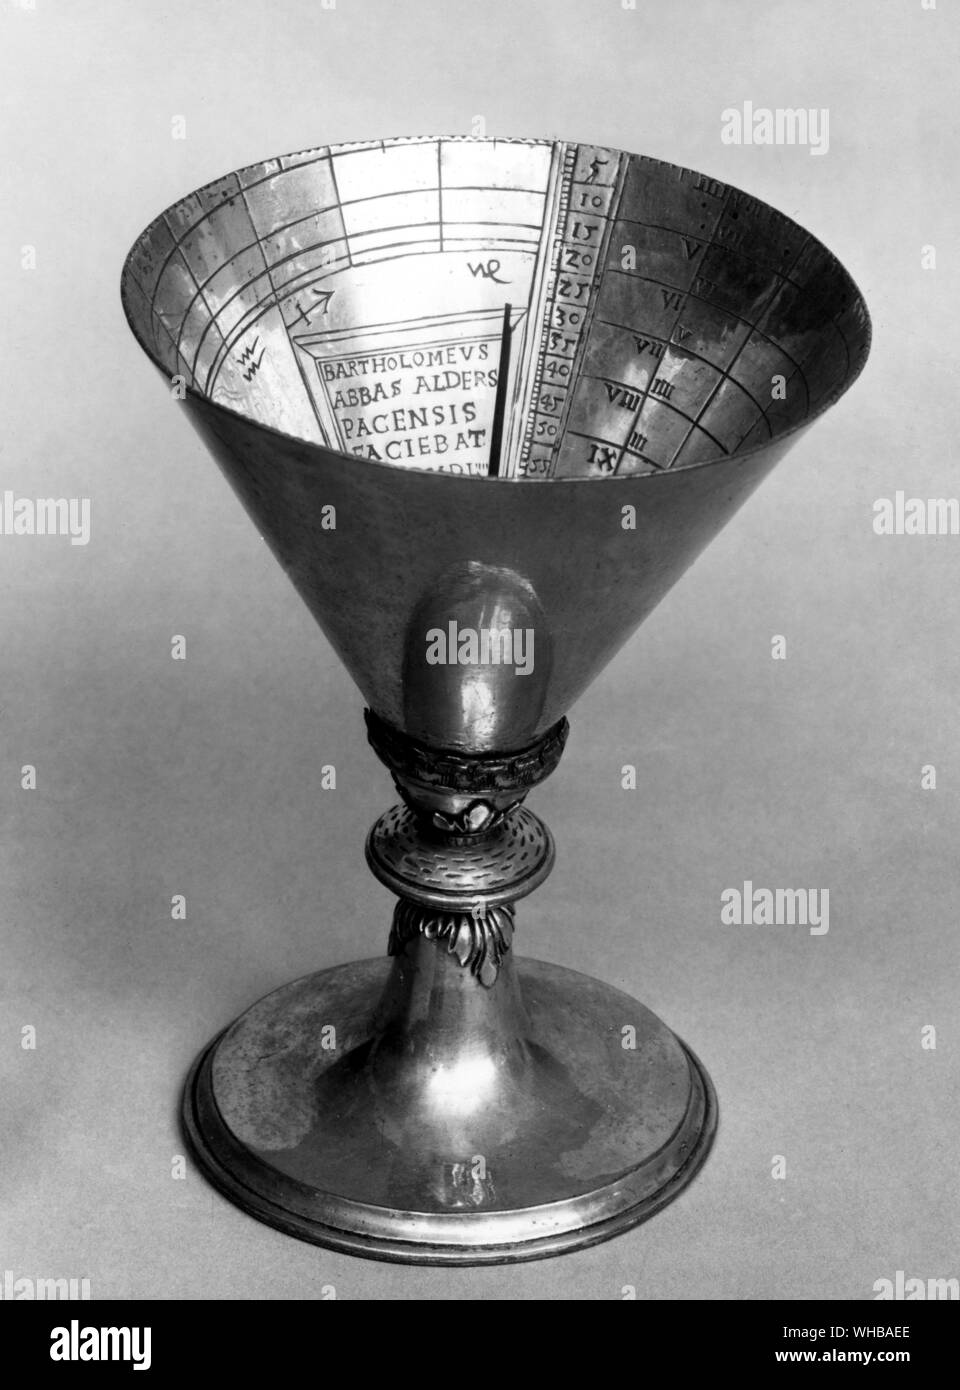 Chalice Dial made for Bartholemew , Abbot of Aldersbach , dated 1554 . Height 5 3/8 inches or 3.8 cm. The British Museum , London Stock Photo